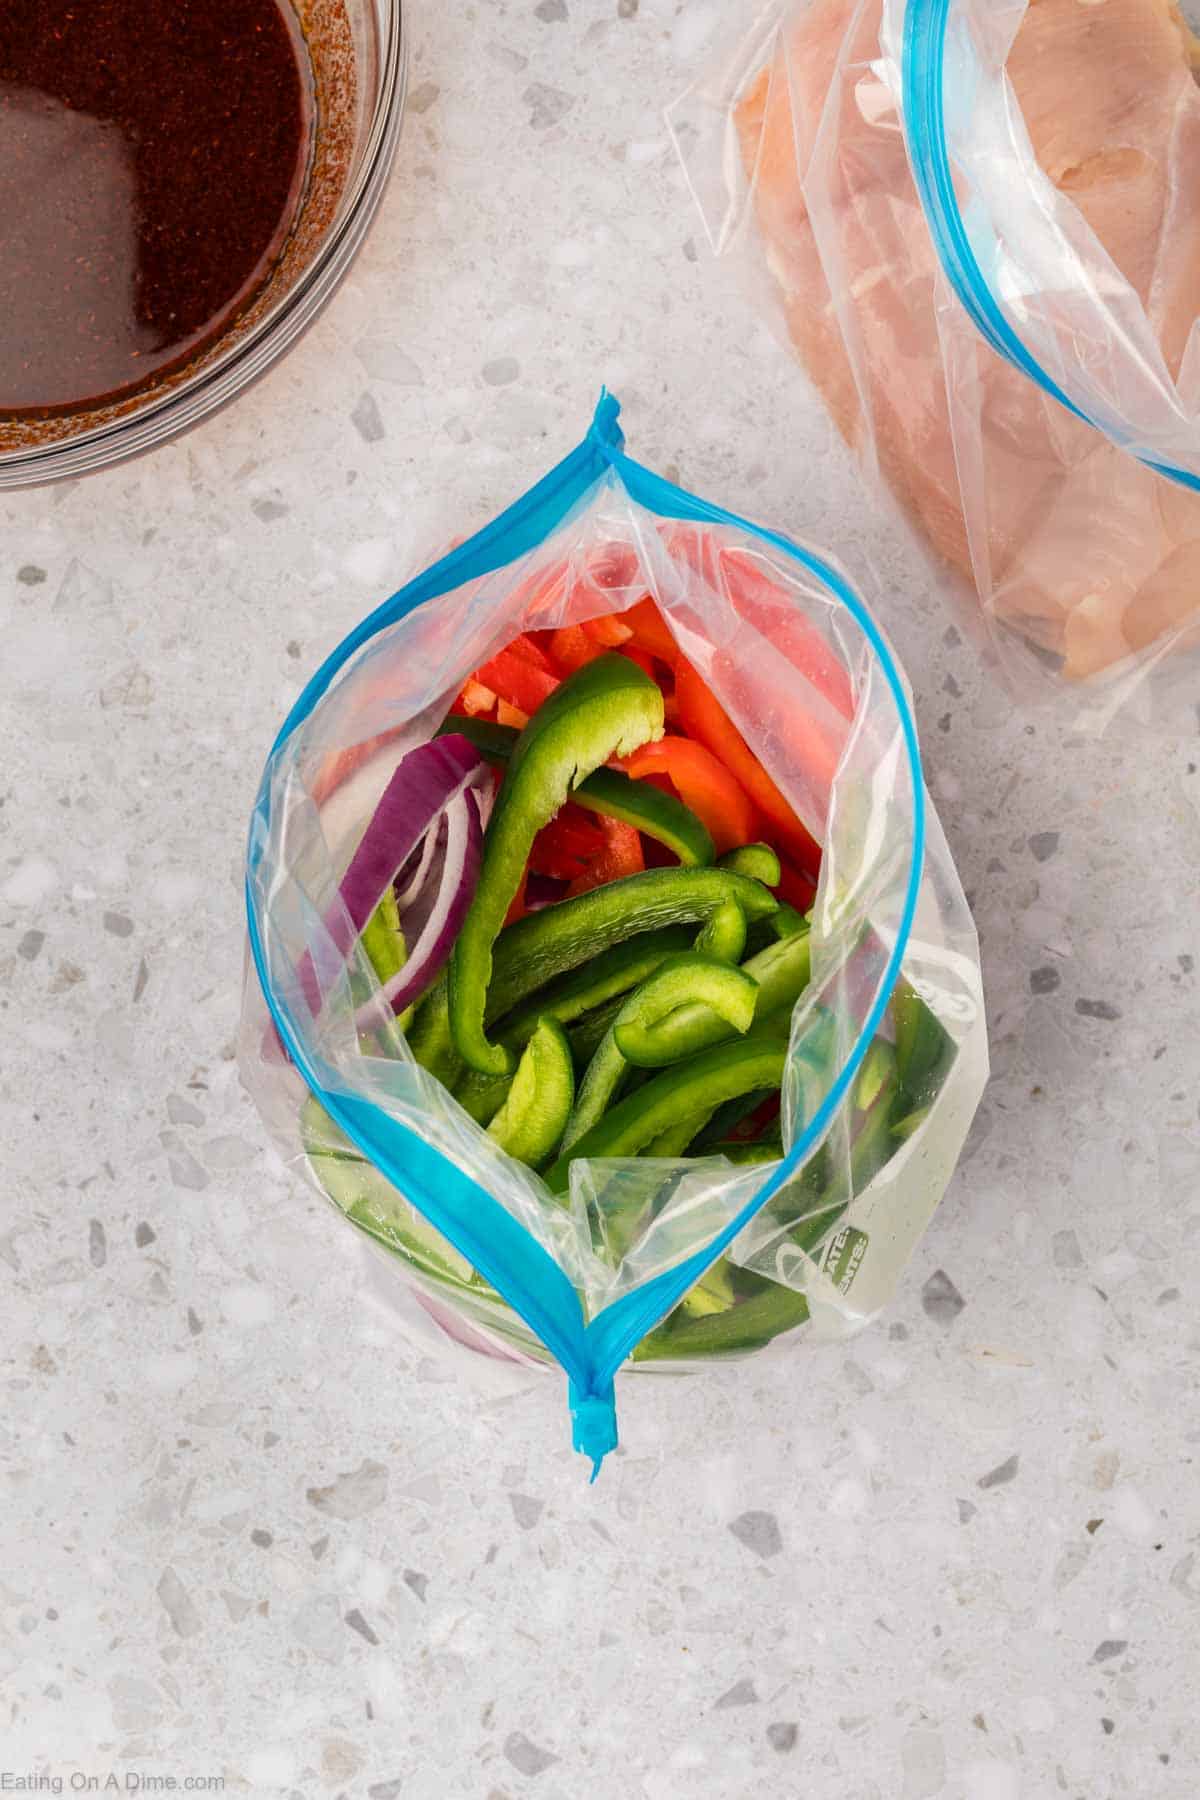 Green bell peppers and red bell peppers in a ziplock bag